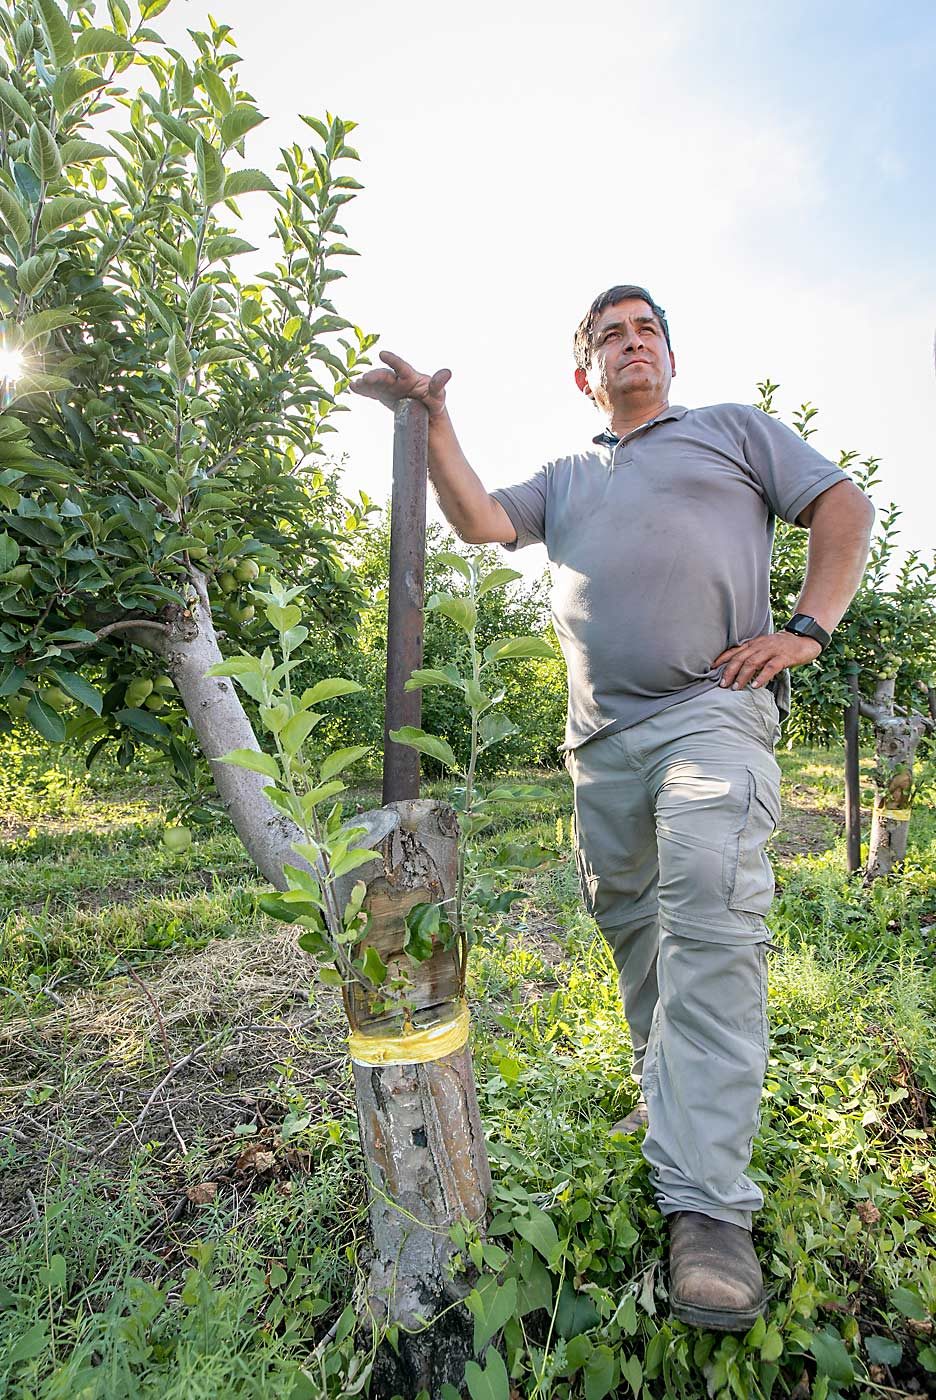 Marcelo Vasquez, the Abendroths’ farm manager, stands next to a former Red Delicious tree that’s been top-worked with three sticks of SnapDragon. The enormous nurse limb will be removed in stages as the new leaders grow, he said. (TJ Mullinax/Good Fruit Grower)